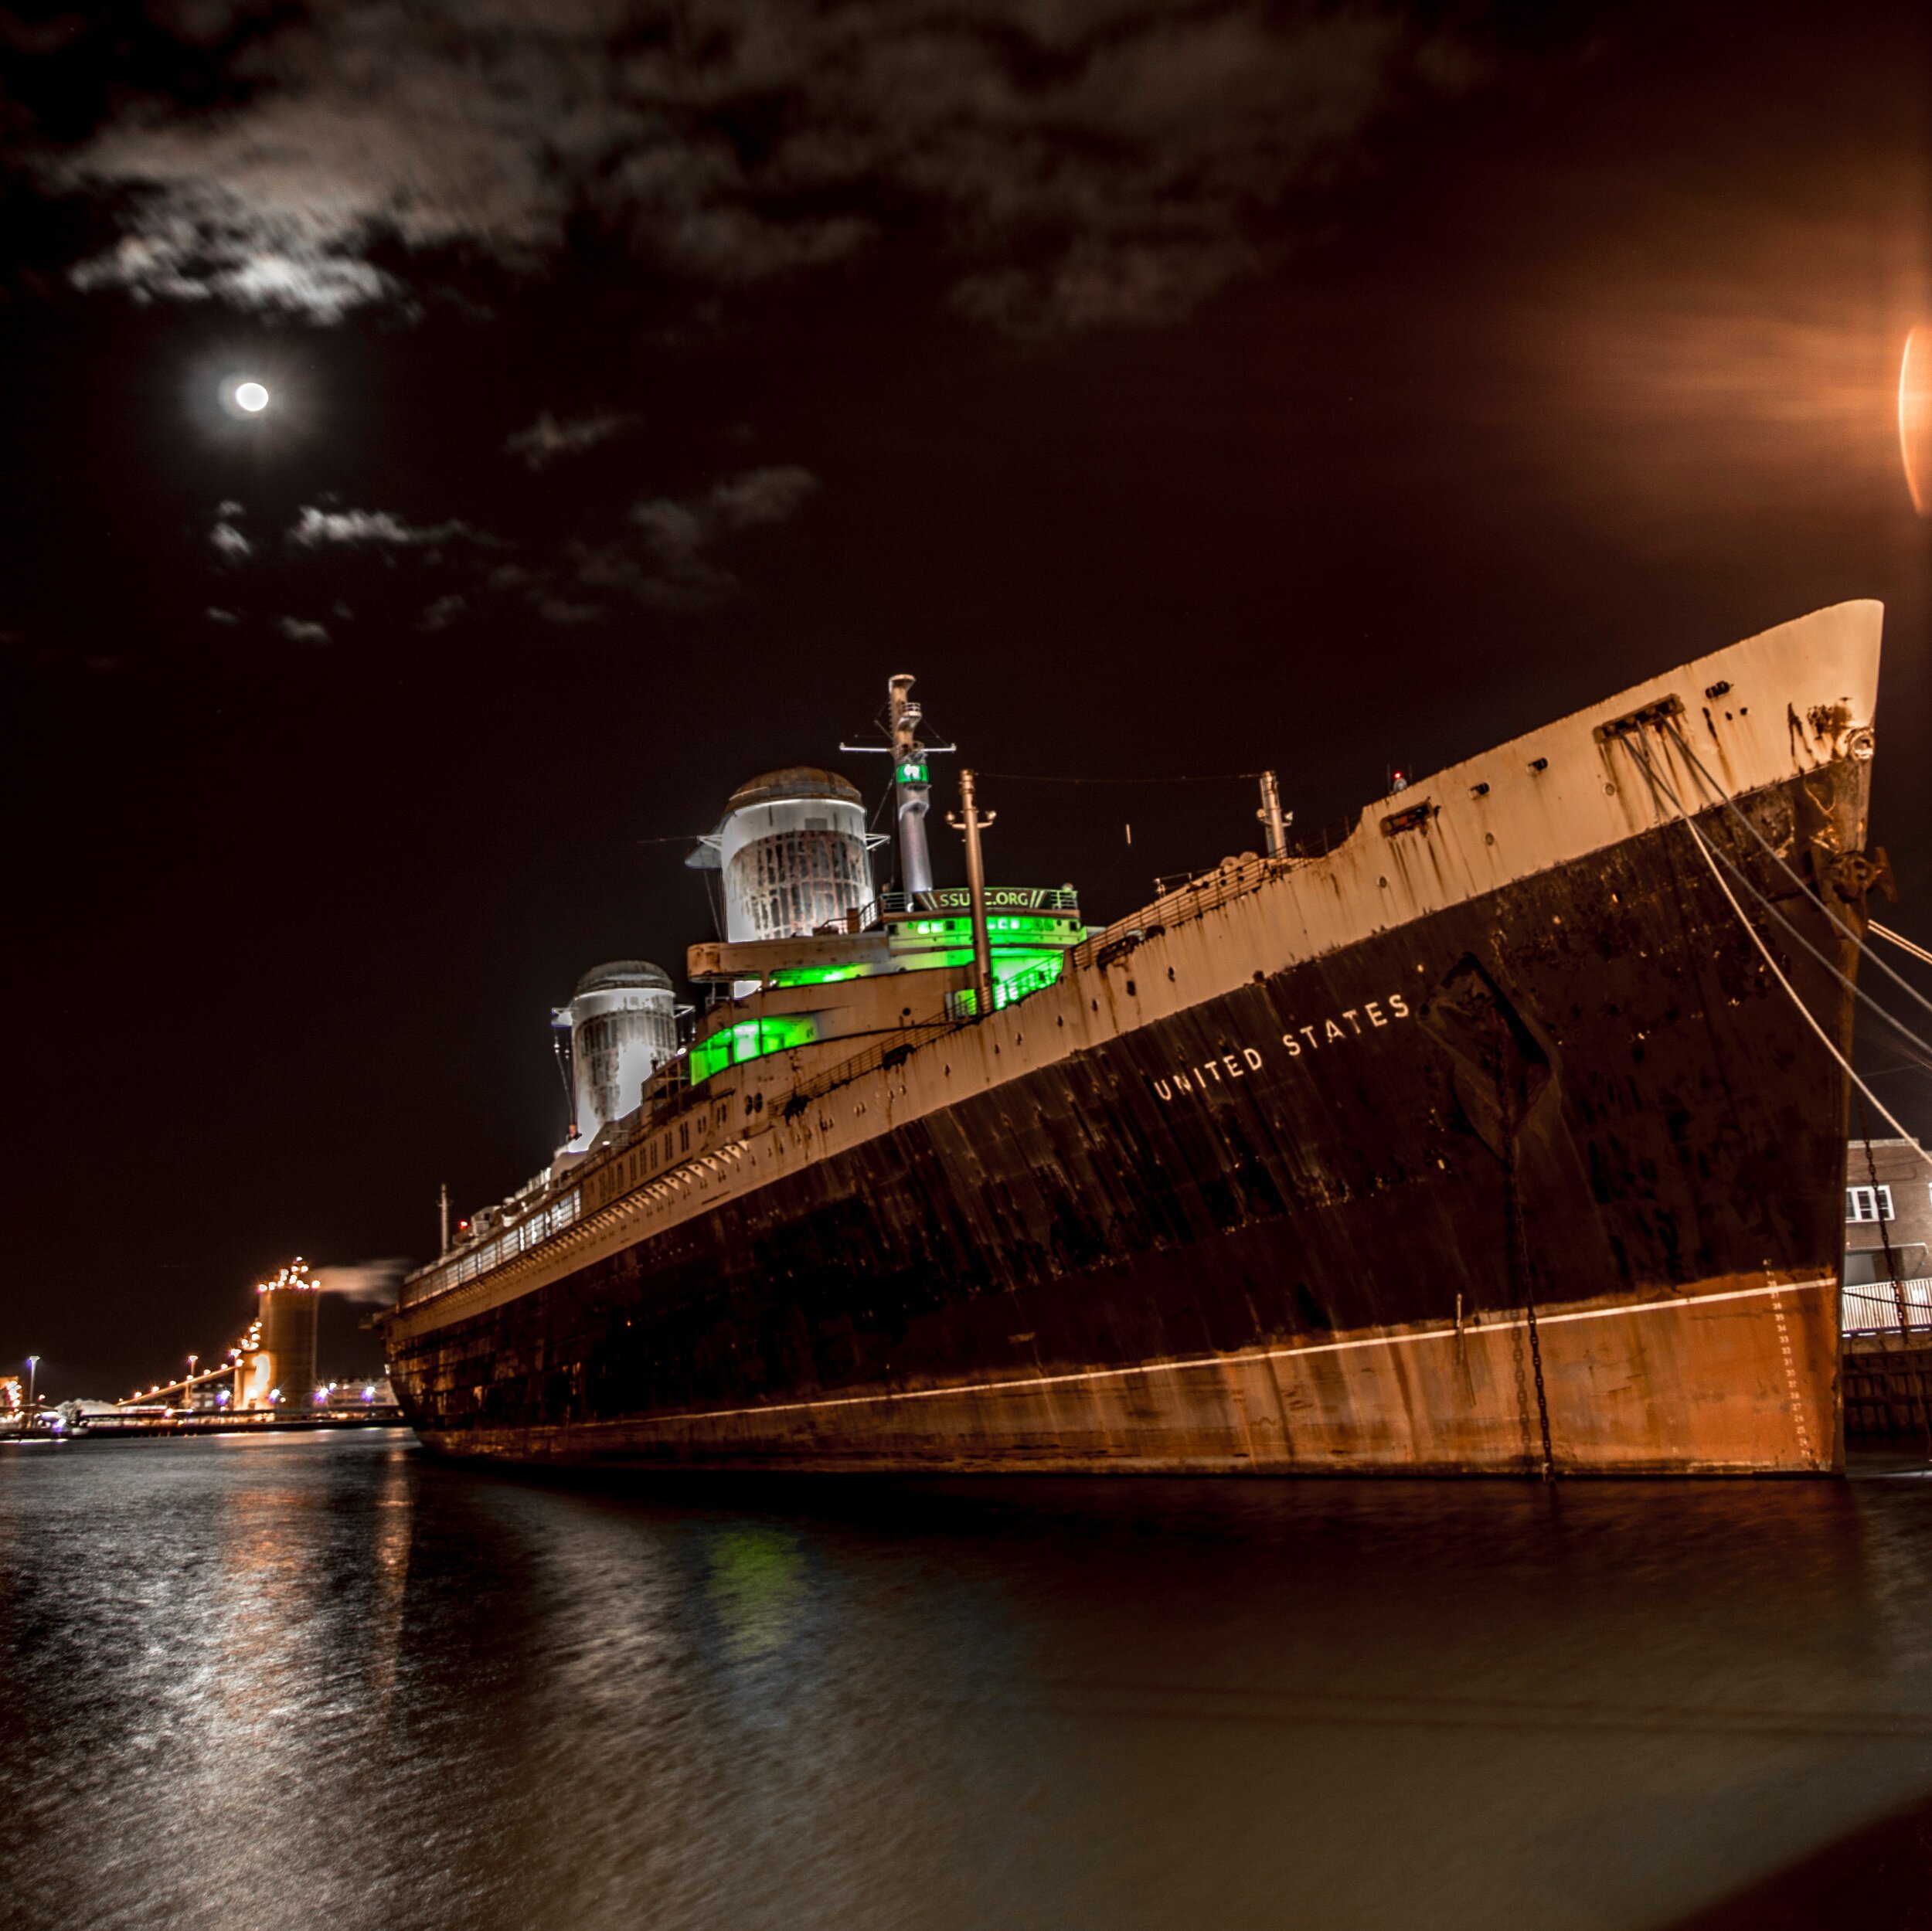 Whatever Happened to the SS United States? The Last Ocean Liner